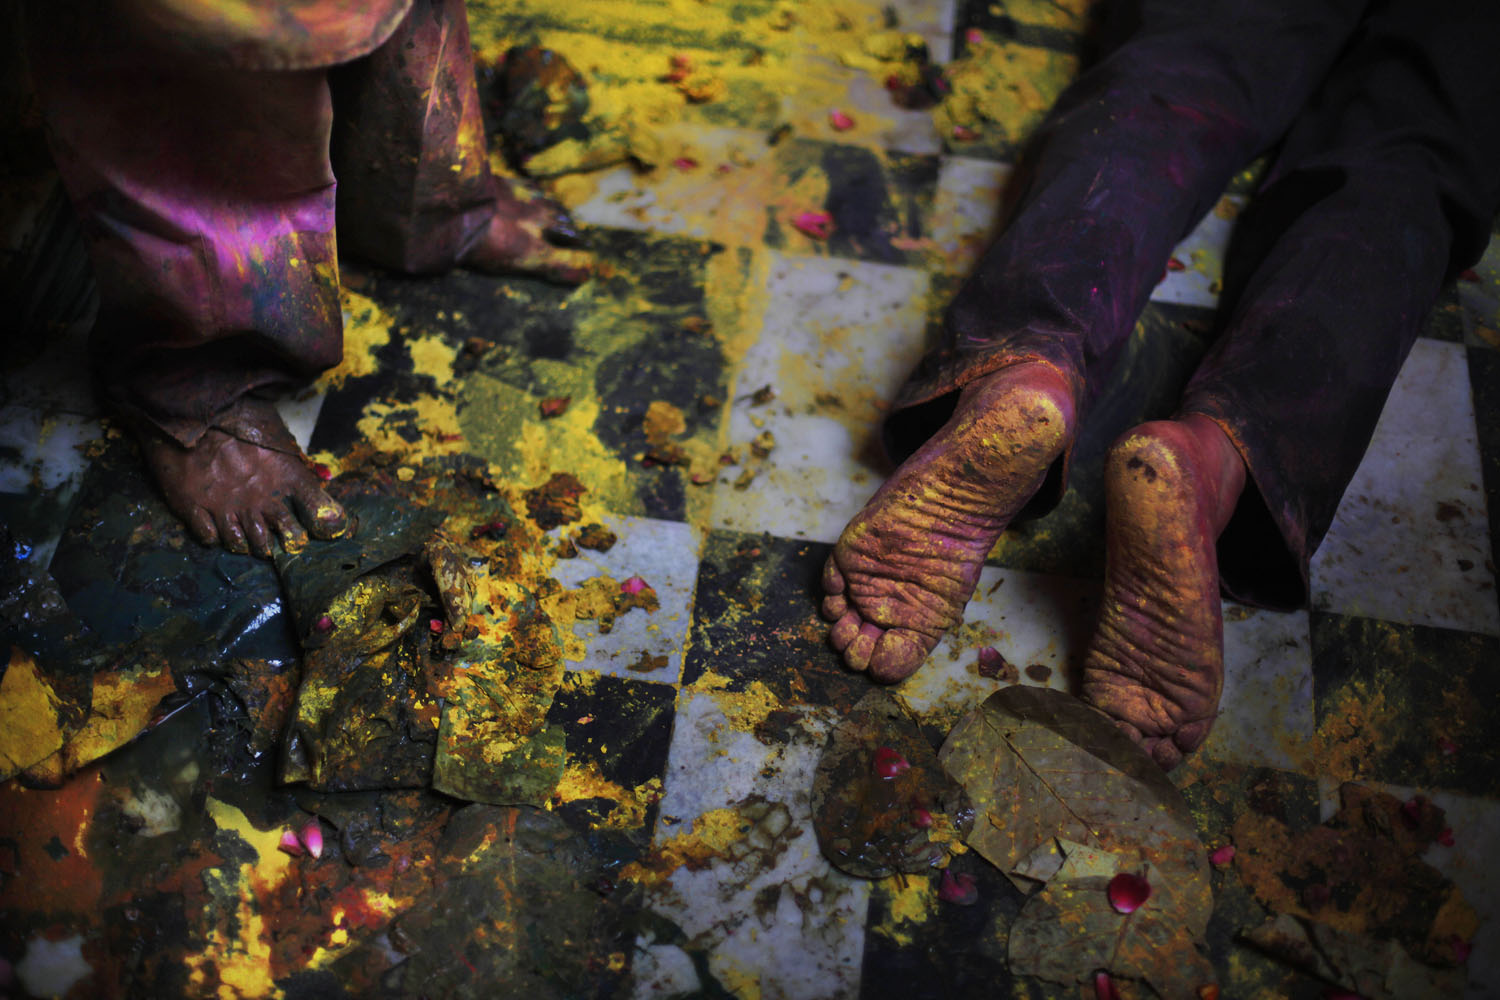 March 25, 2013. A Hindu devotee kneels down for prayers amid colors thrown inside Banke Bihari temple during Holi festival celebrations in Vrindavan, India. Holi, the festival of colors, celebrates the arrival of spring among other things.